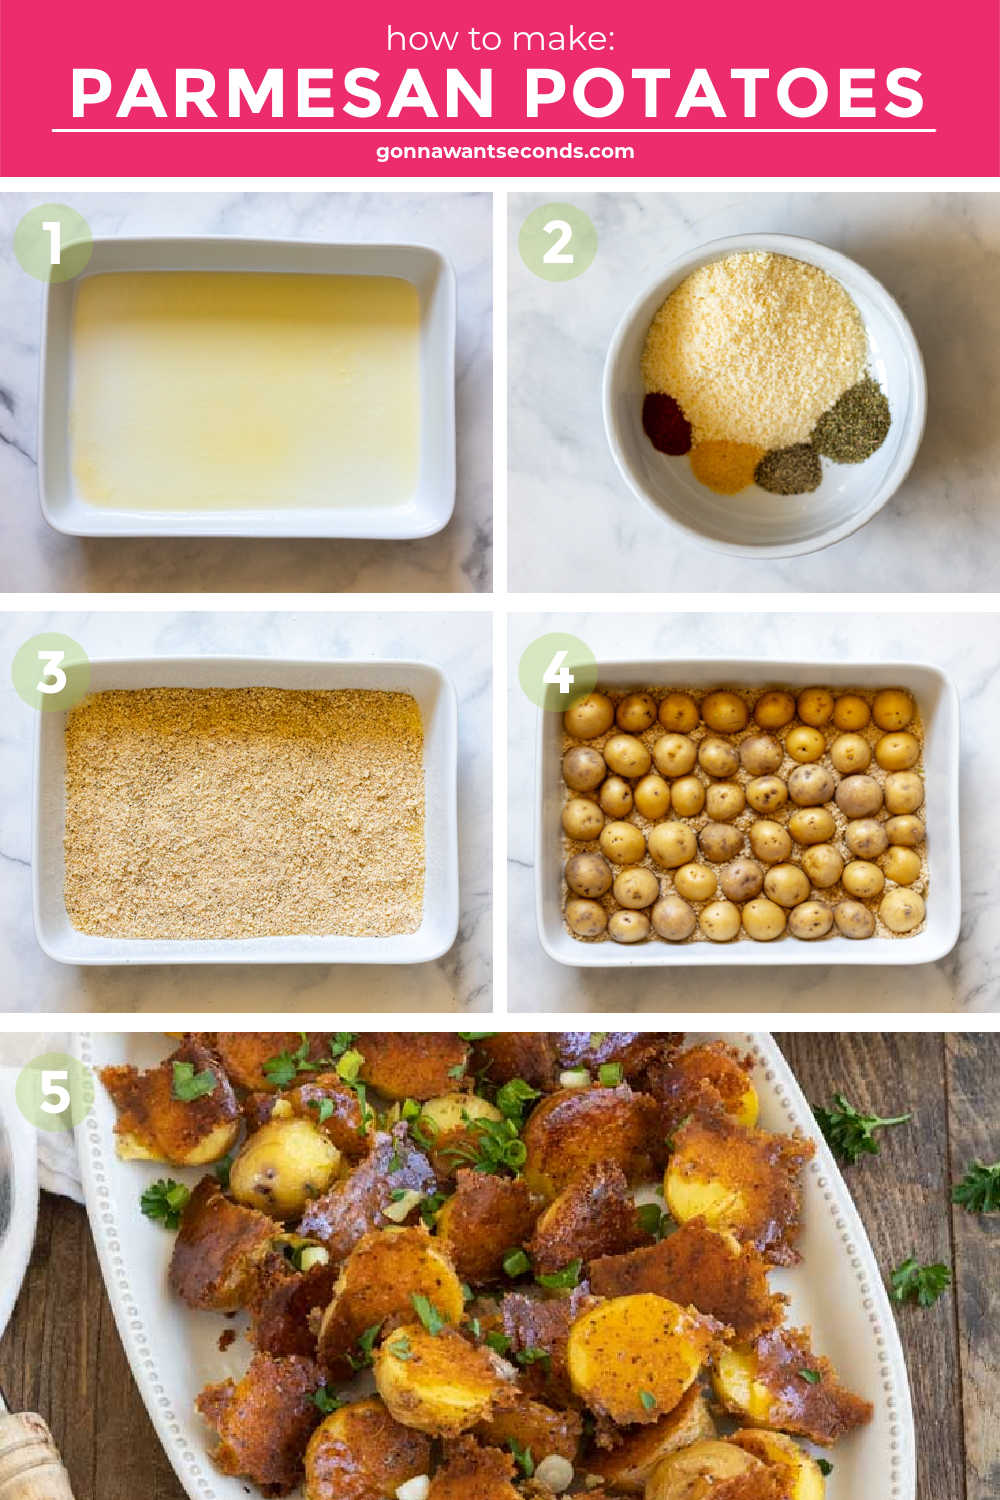 step by step how to make parmesan potatoes